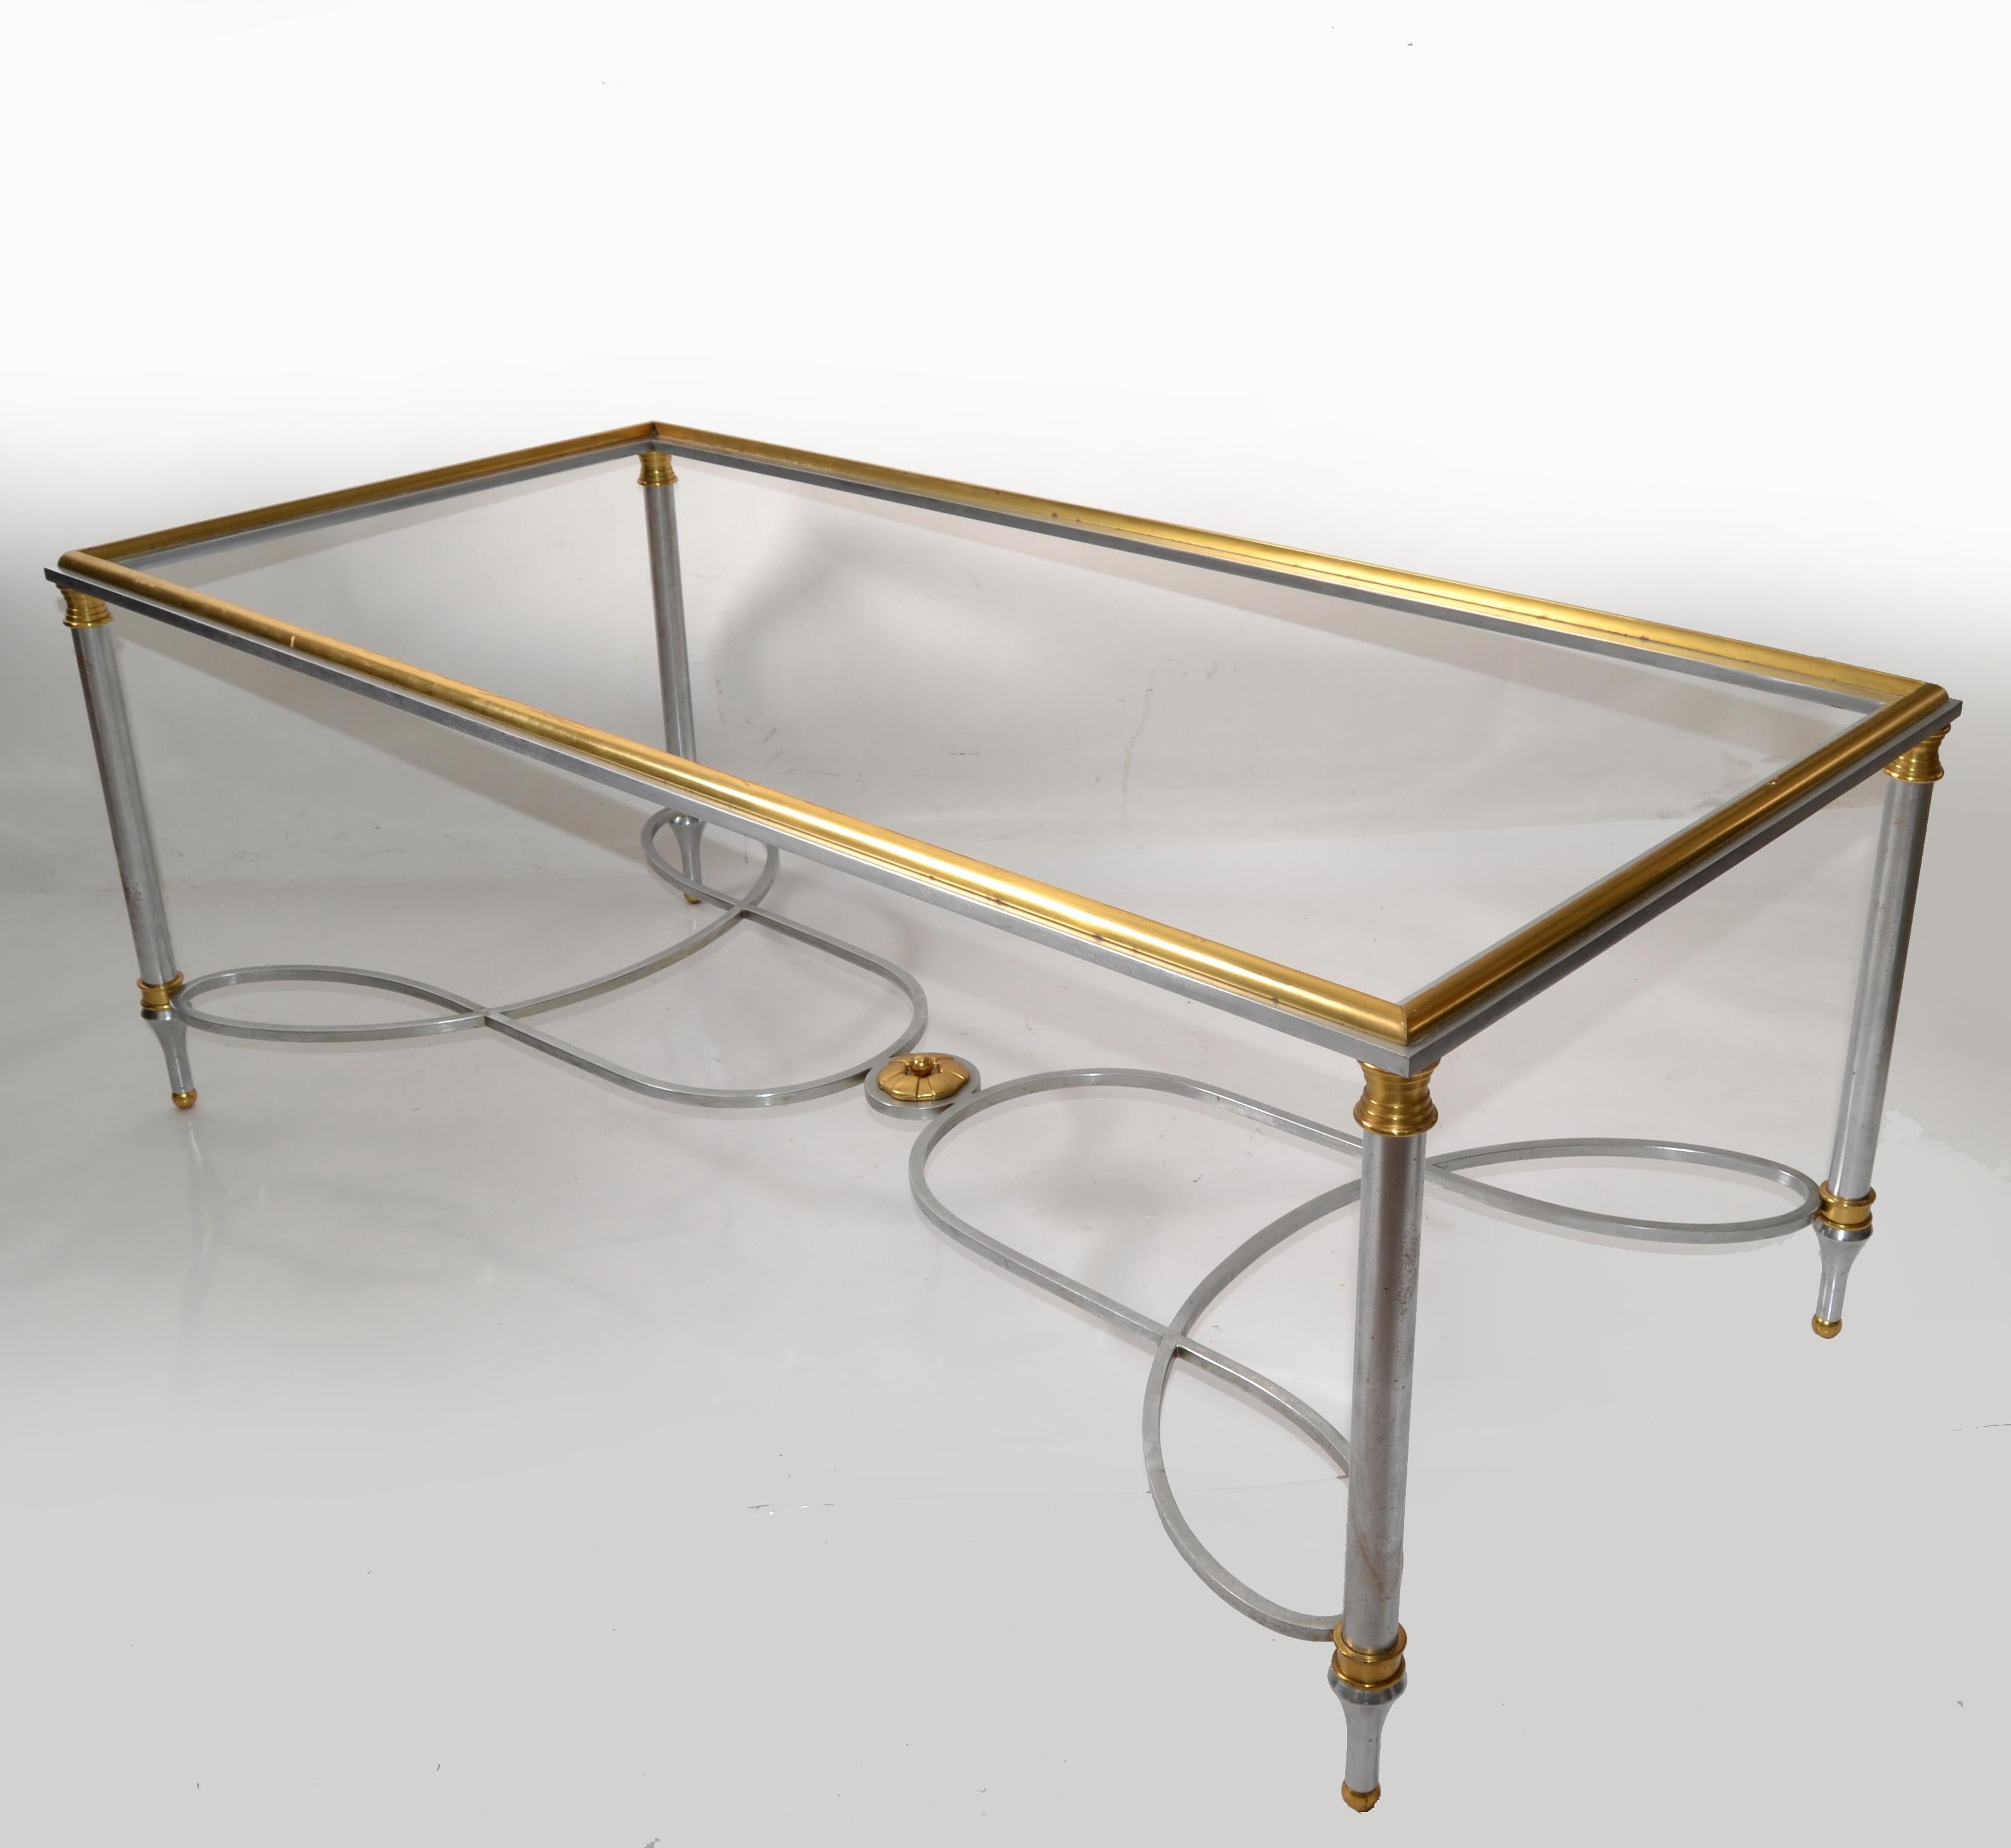 1970s Maison Charles French Steel Brass Glass Coffee Table Mid-Century Modern  In Good Condition For Sale In Miami, FL